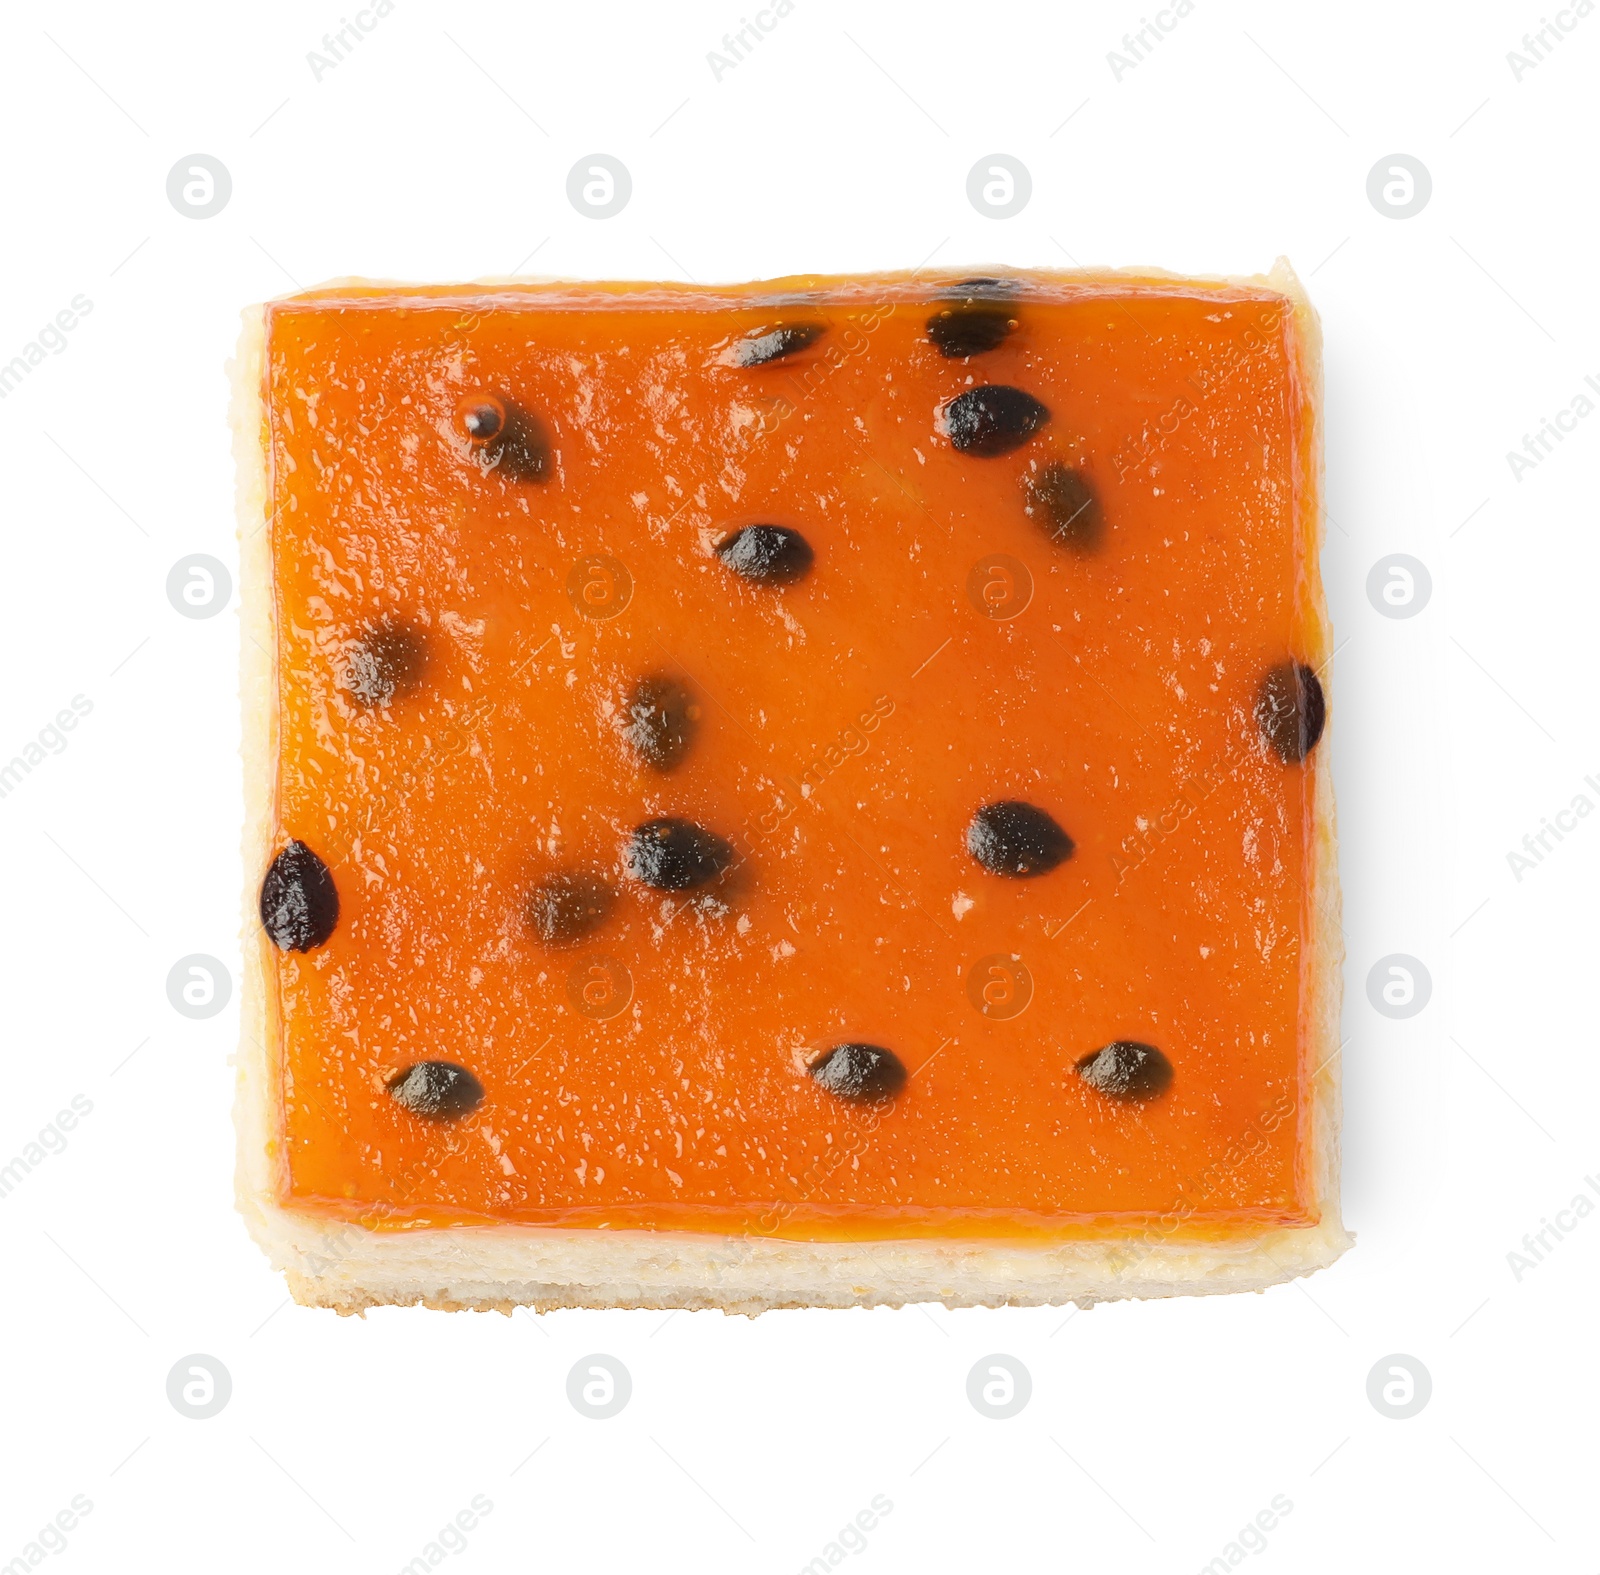 Photo of Piece of cheesecake with jelly on white background, top view